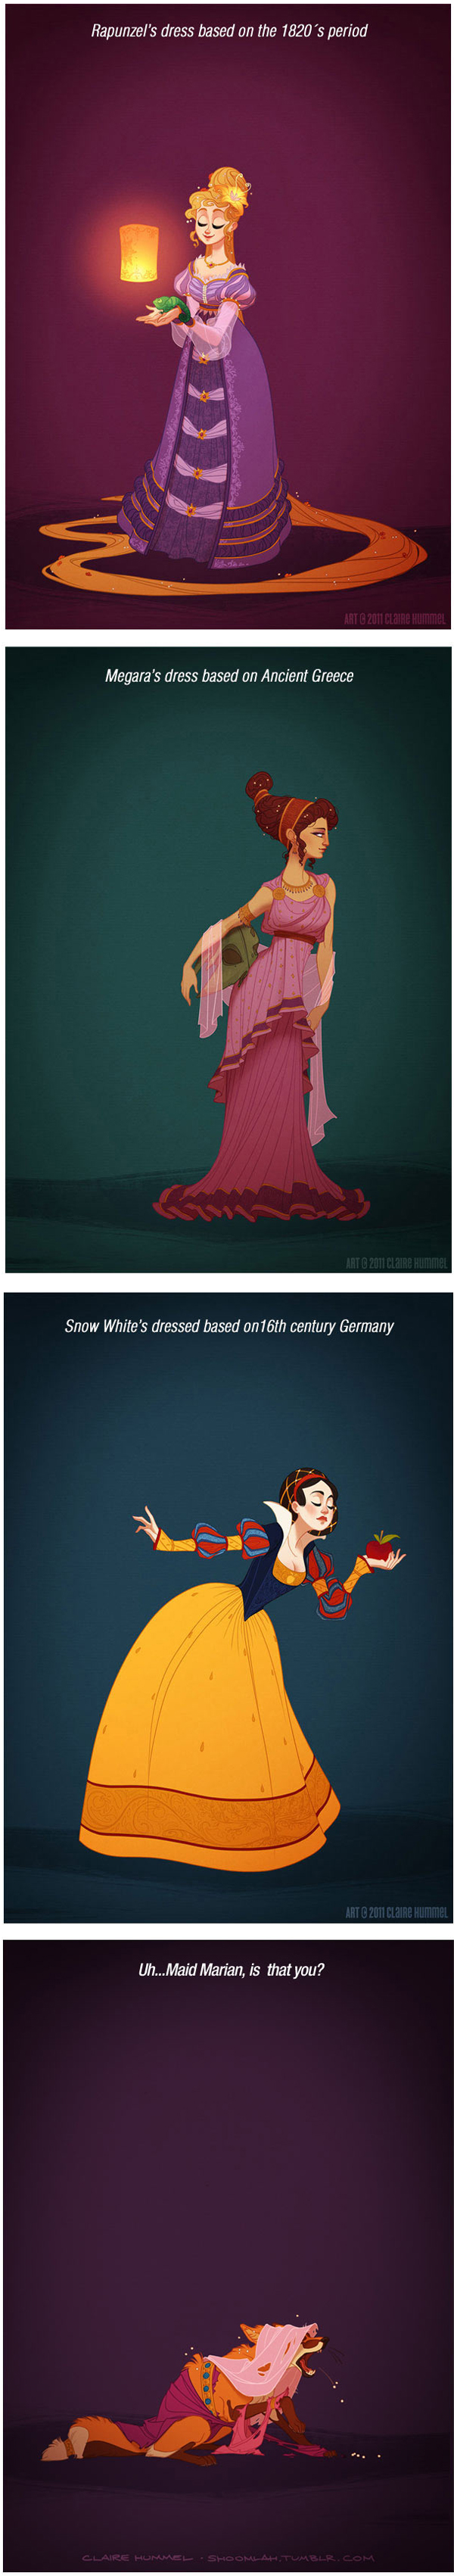 disney princess in historically accurate outfit